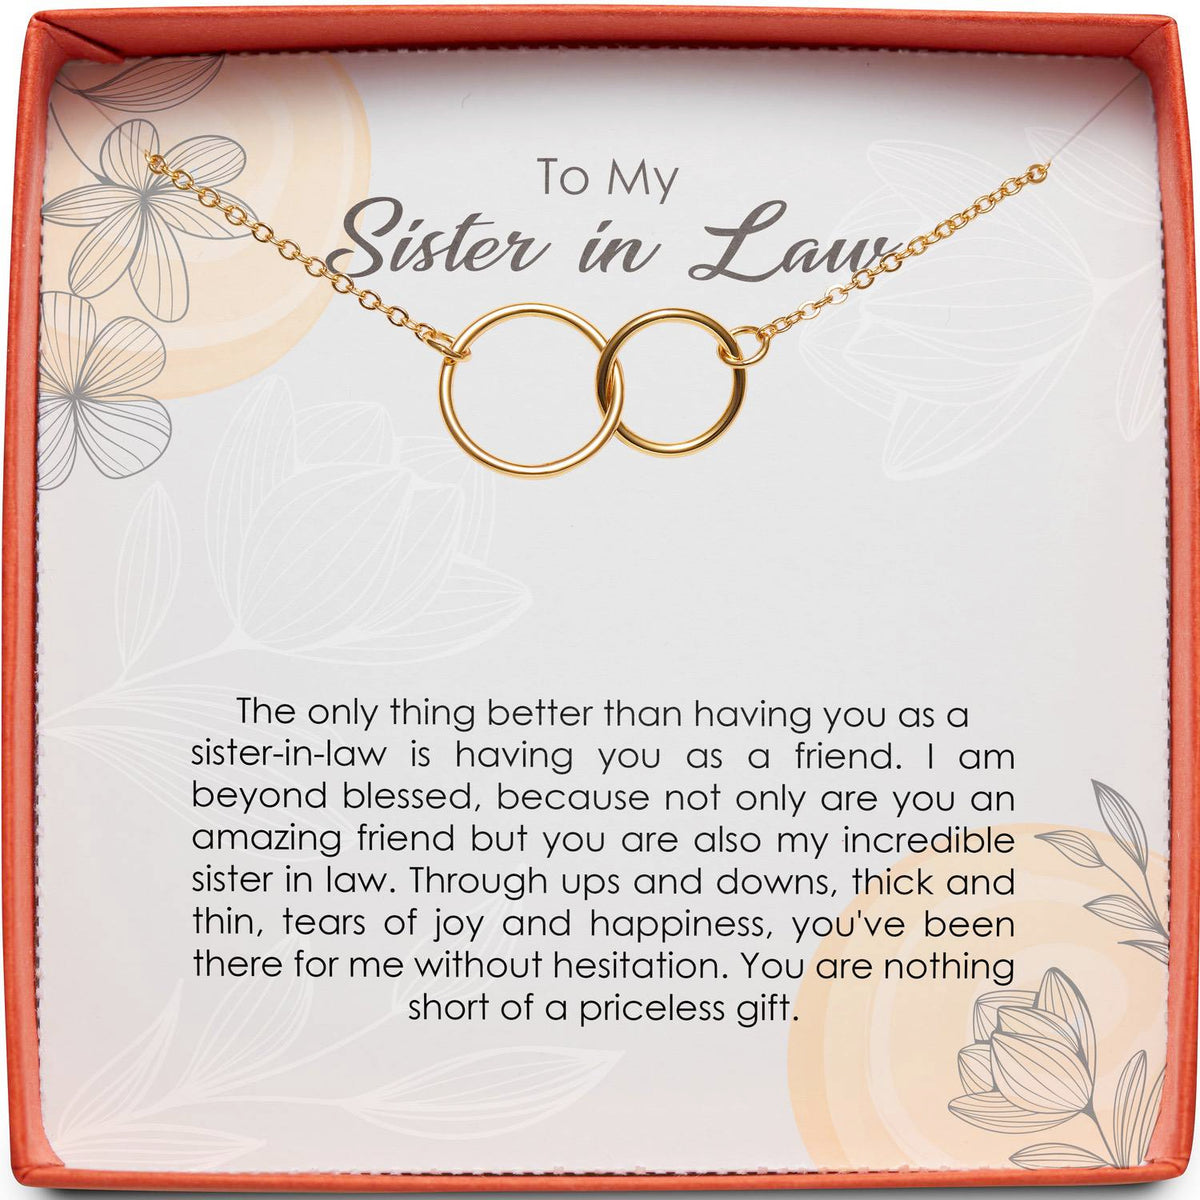 To My Sister in Law | Priceless Gift | Interlocking Circles